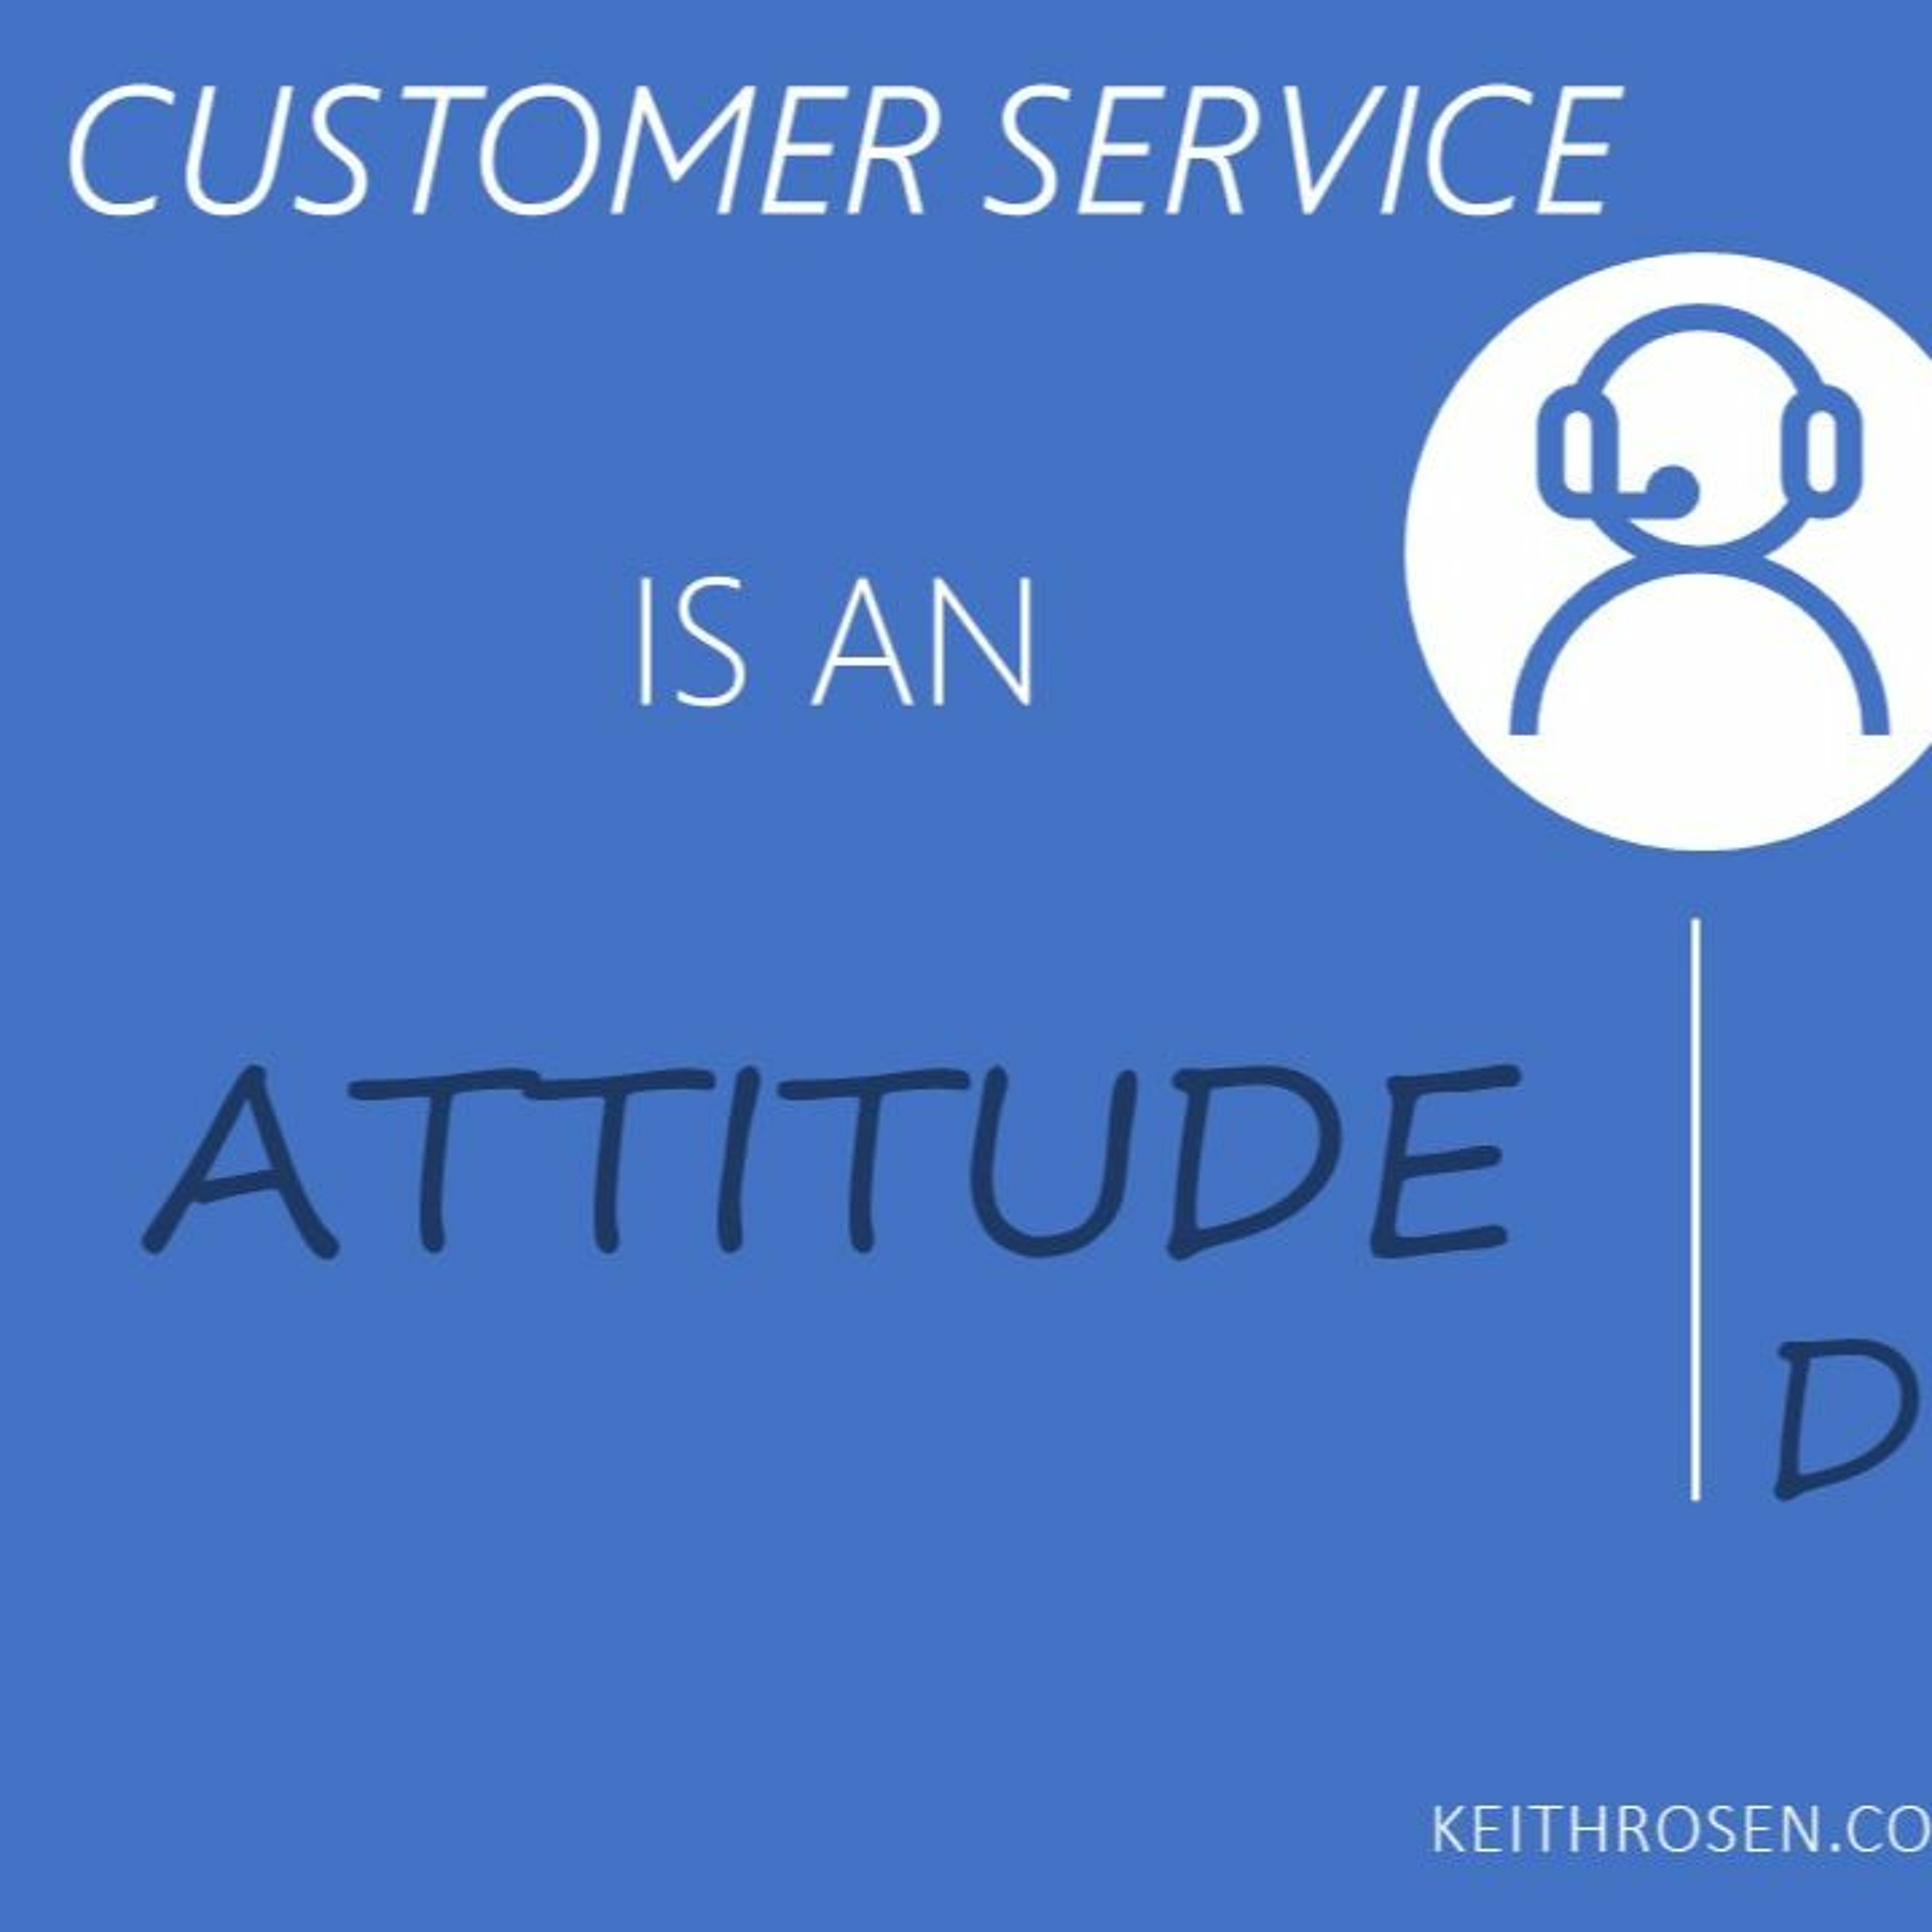 A REAL Customer Service Experience That Builds Loyalty And Makes You A Memorable Salesperson